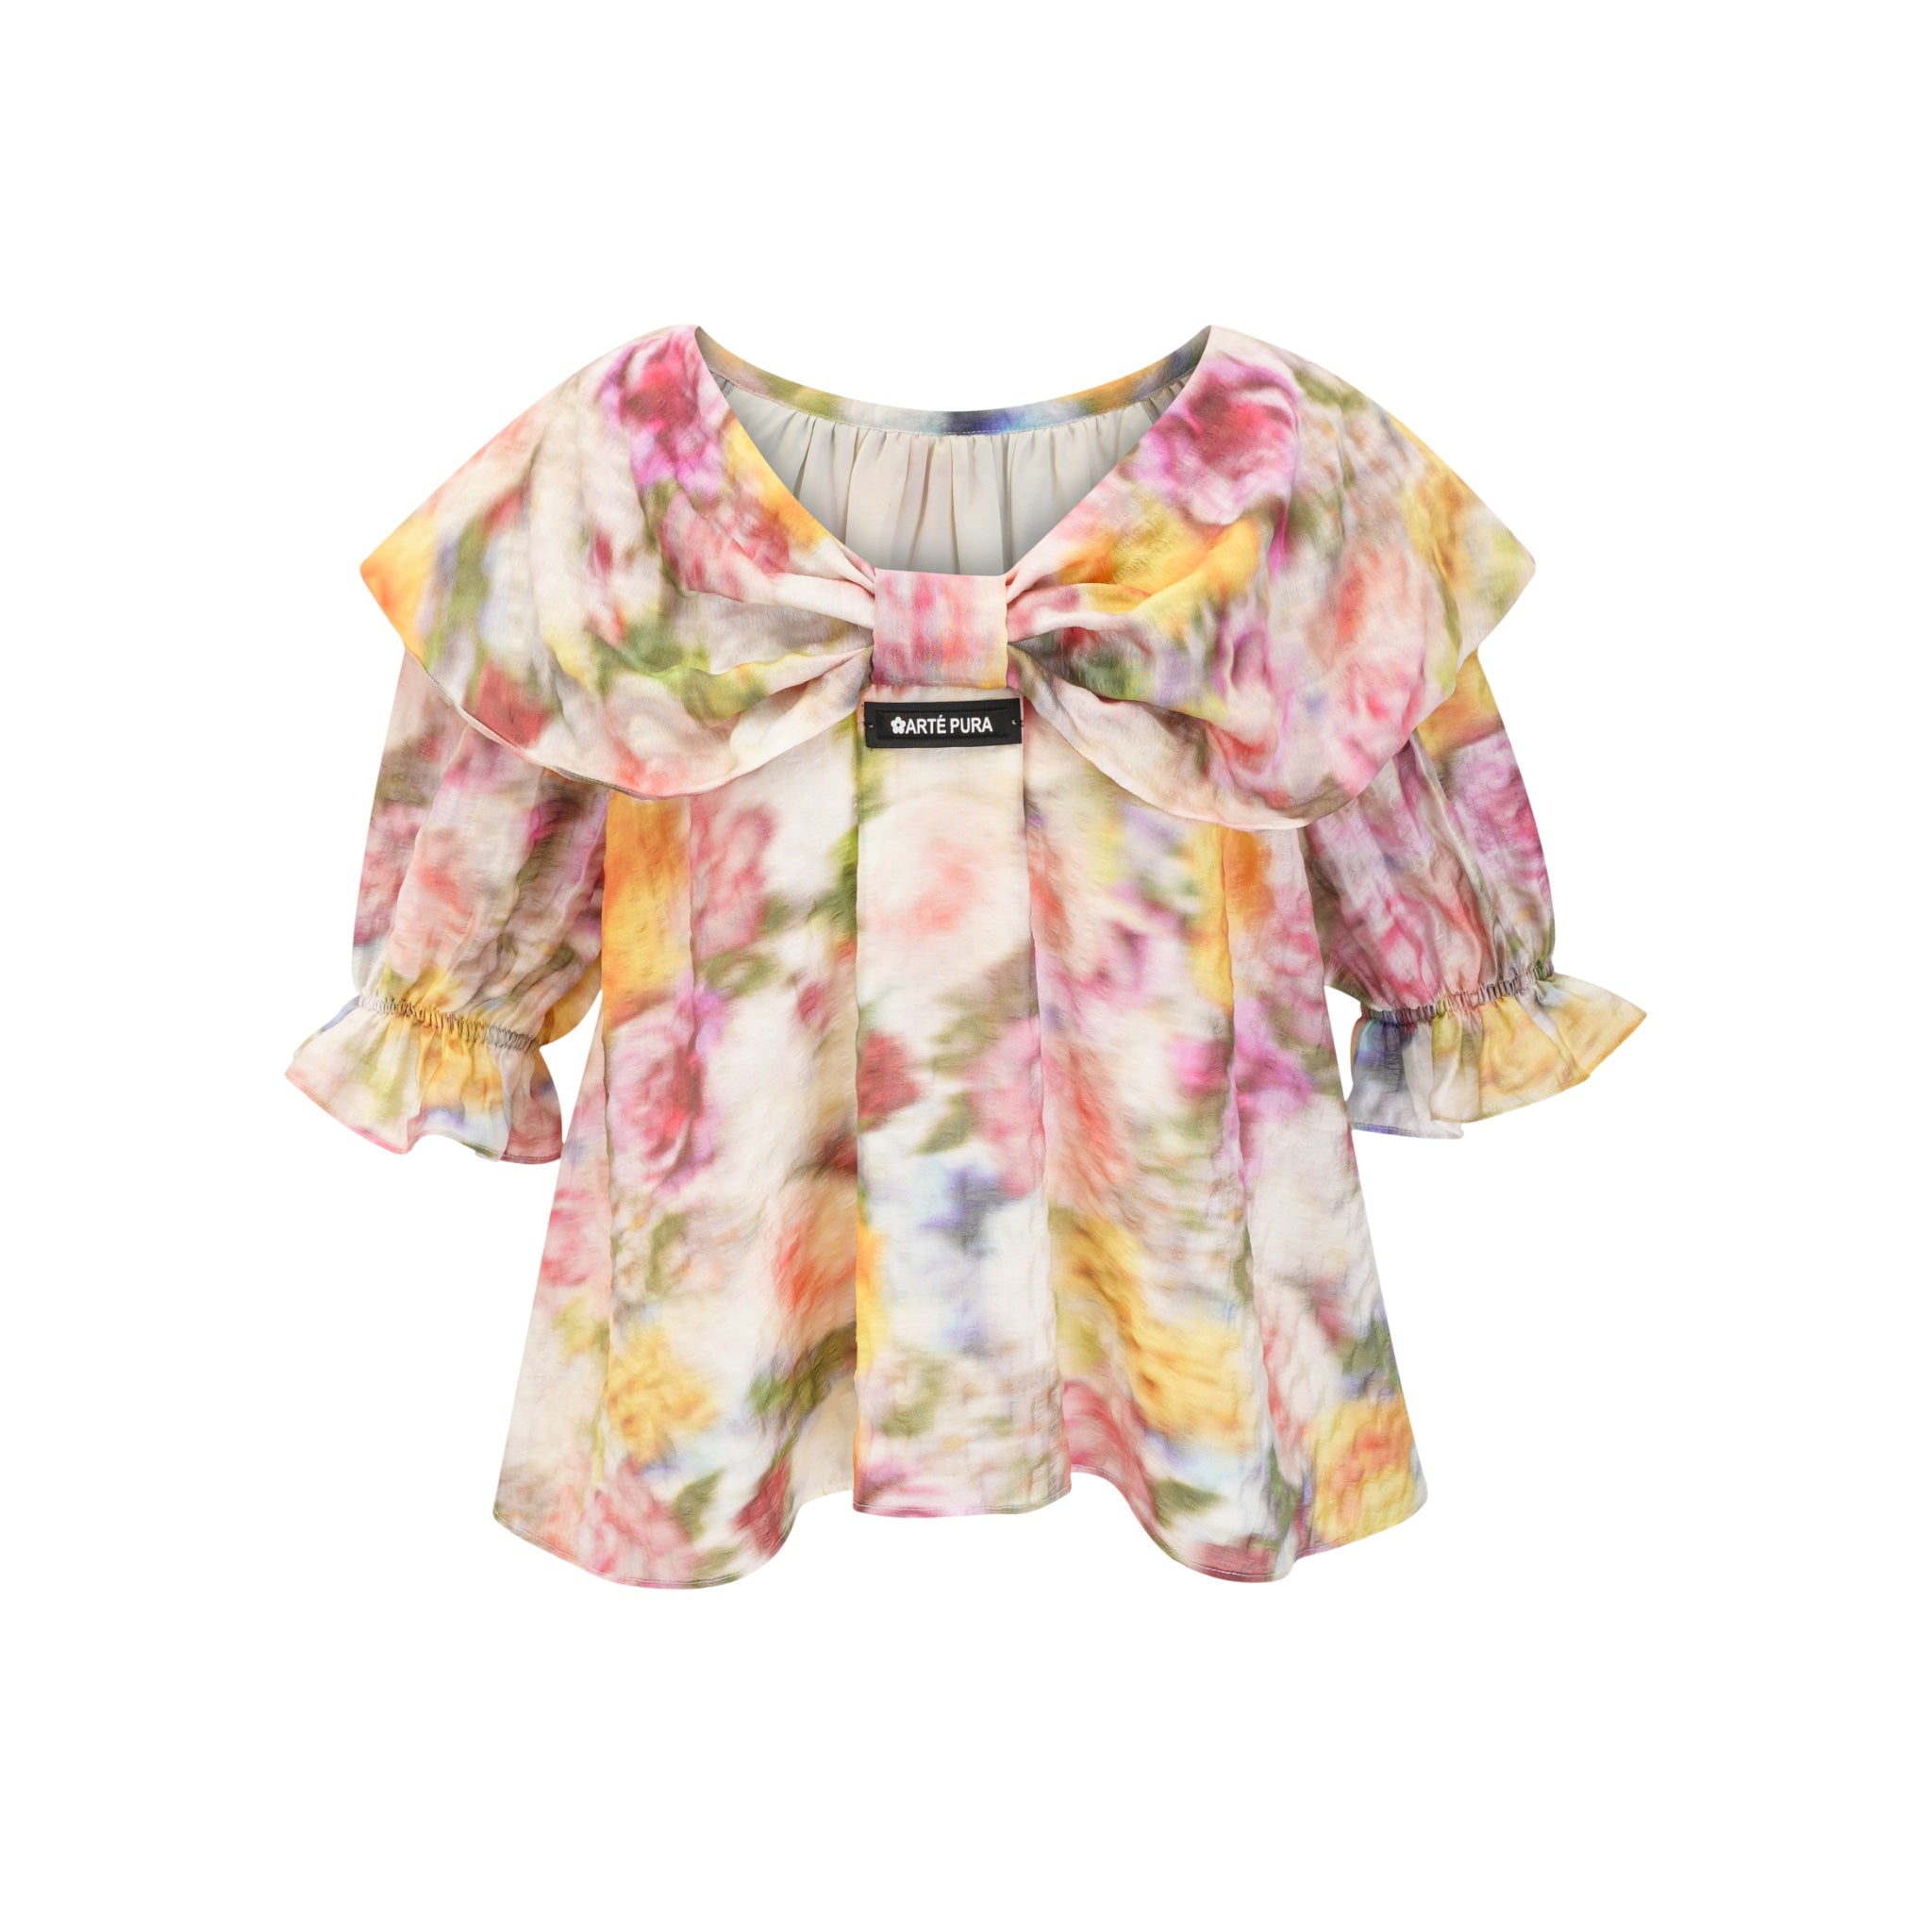 ARTE PURA Floral Painting Top With Bow Tie | MADA IN CHINA